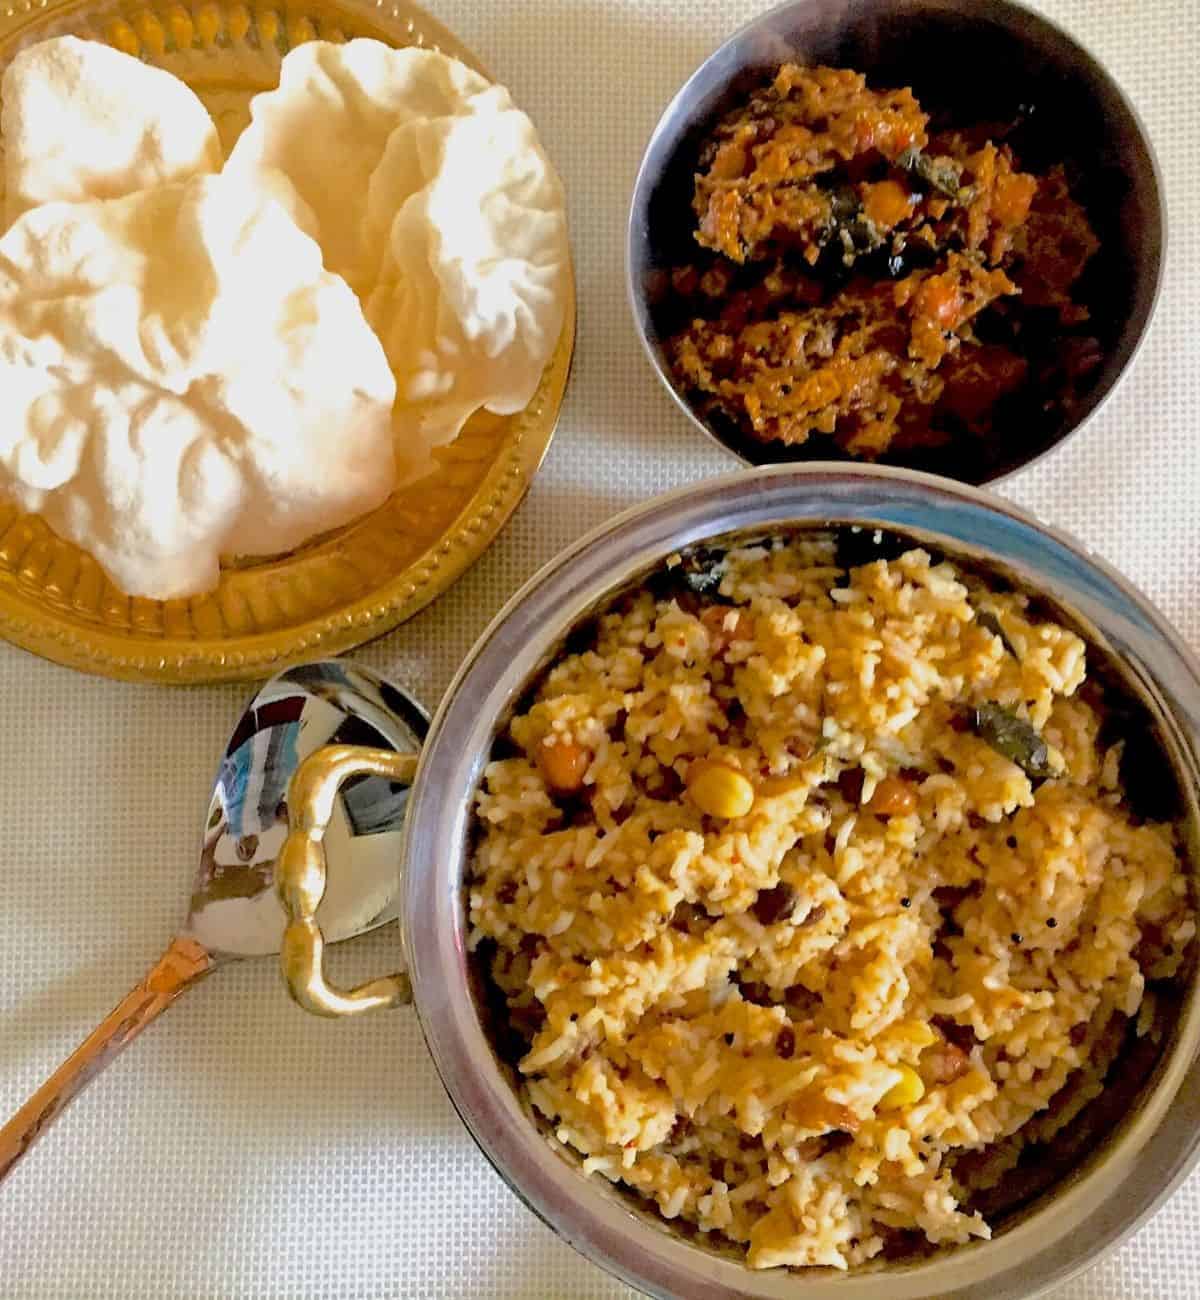 Light brown Puliyodharai Tamarind Rice with peanuts in a brass bowl along with a plate of fried pappad and a bowl of brown tamarind paste. A spoon lies between the bowls which are all on an off white background